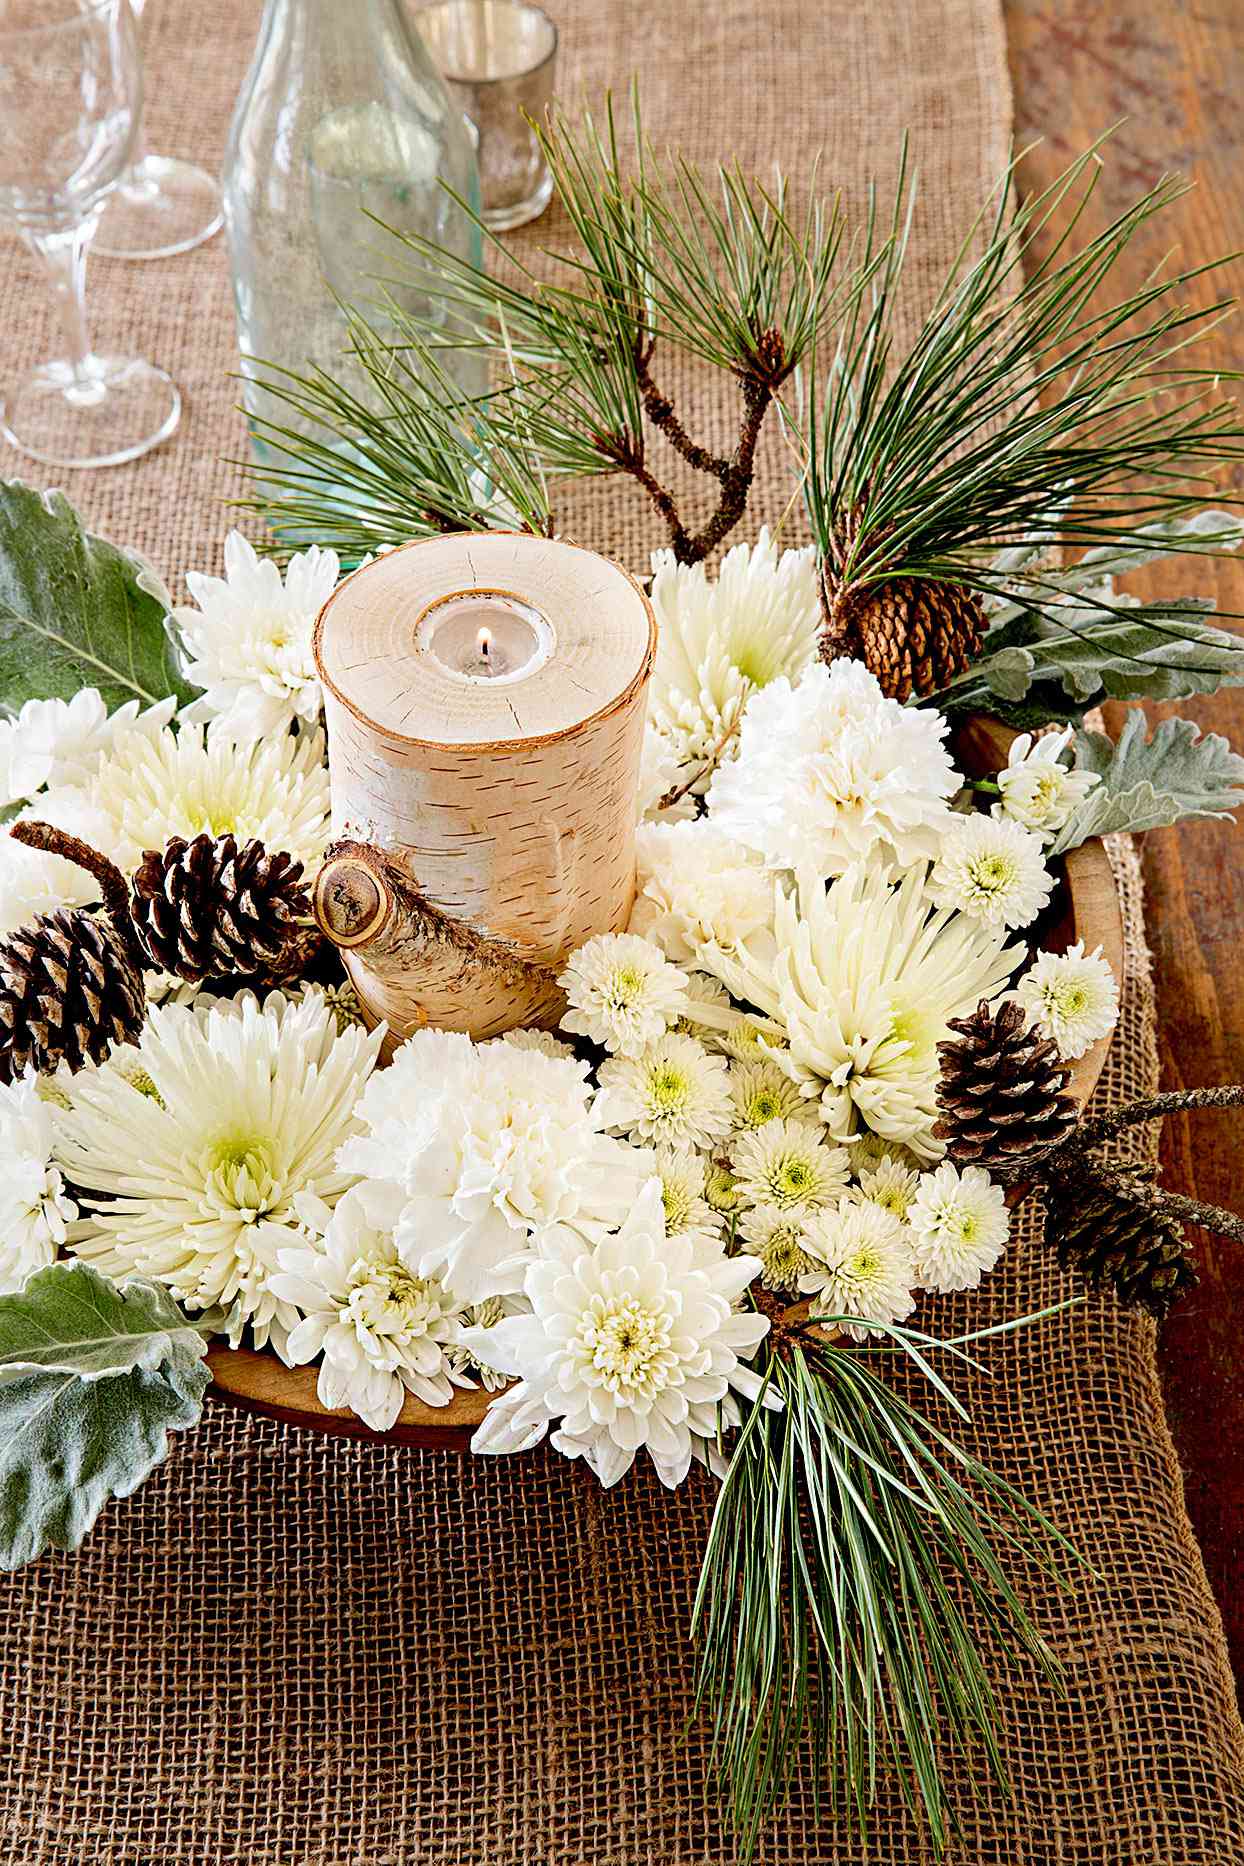 Centerpiece made of flowers, evergreens, and pinecones